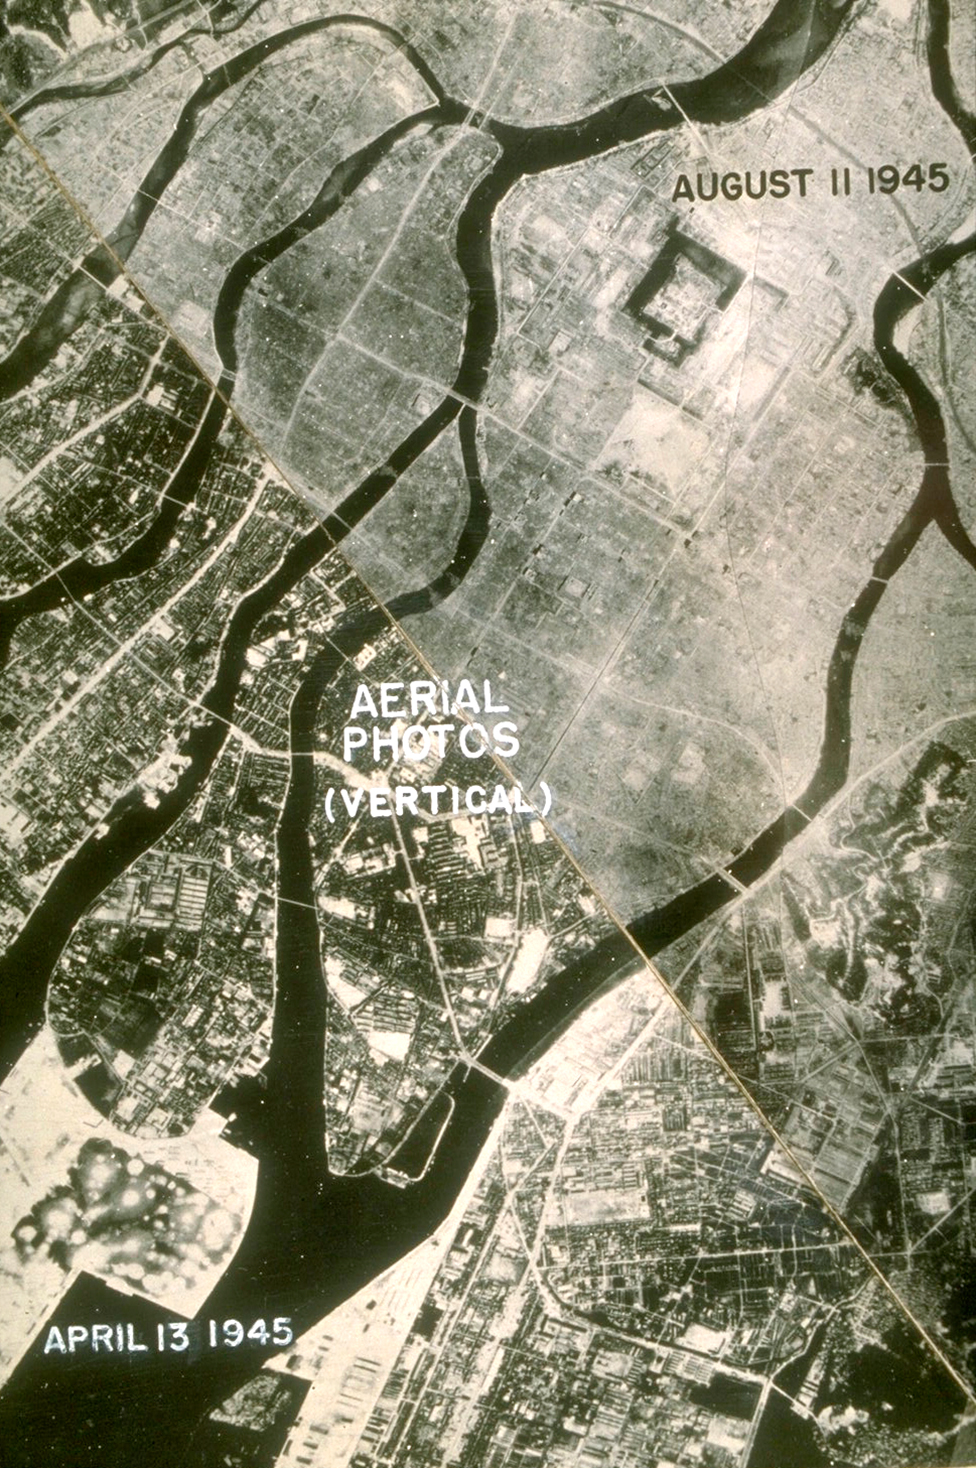 A composite aerial image showing Hiroshima before and after the atomic bomb